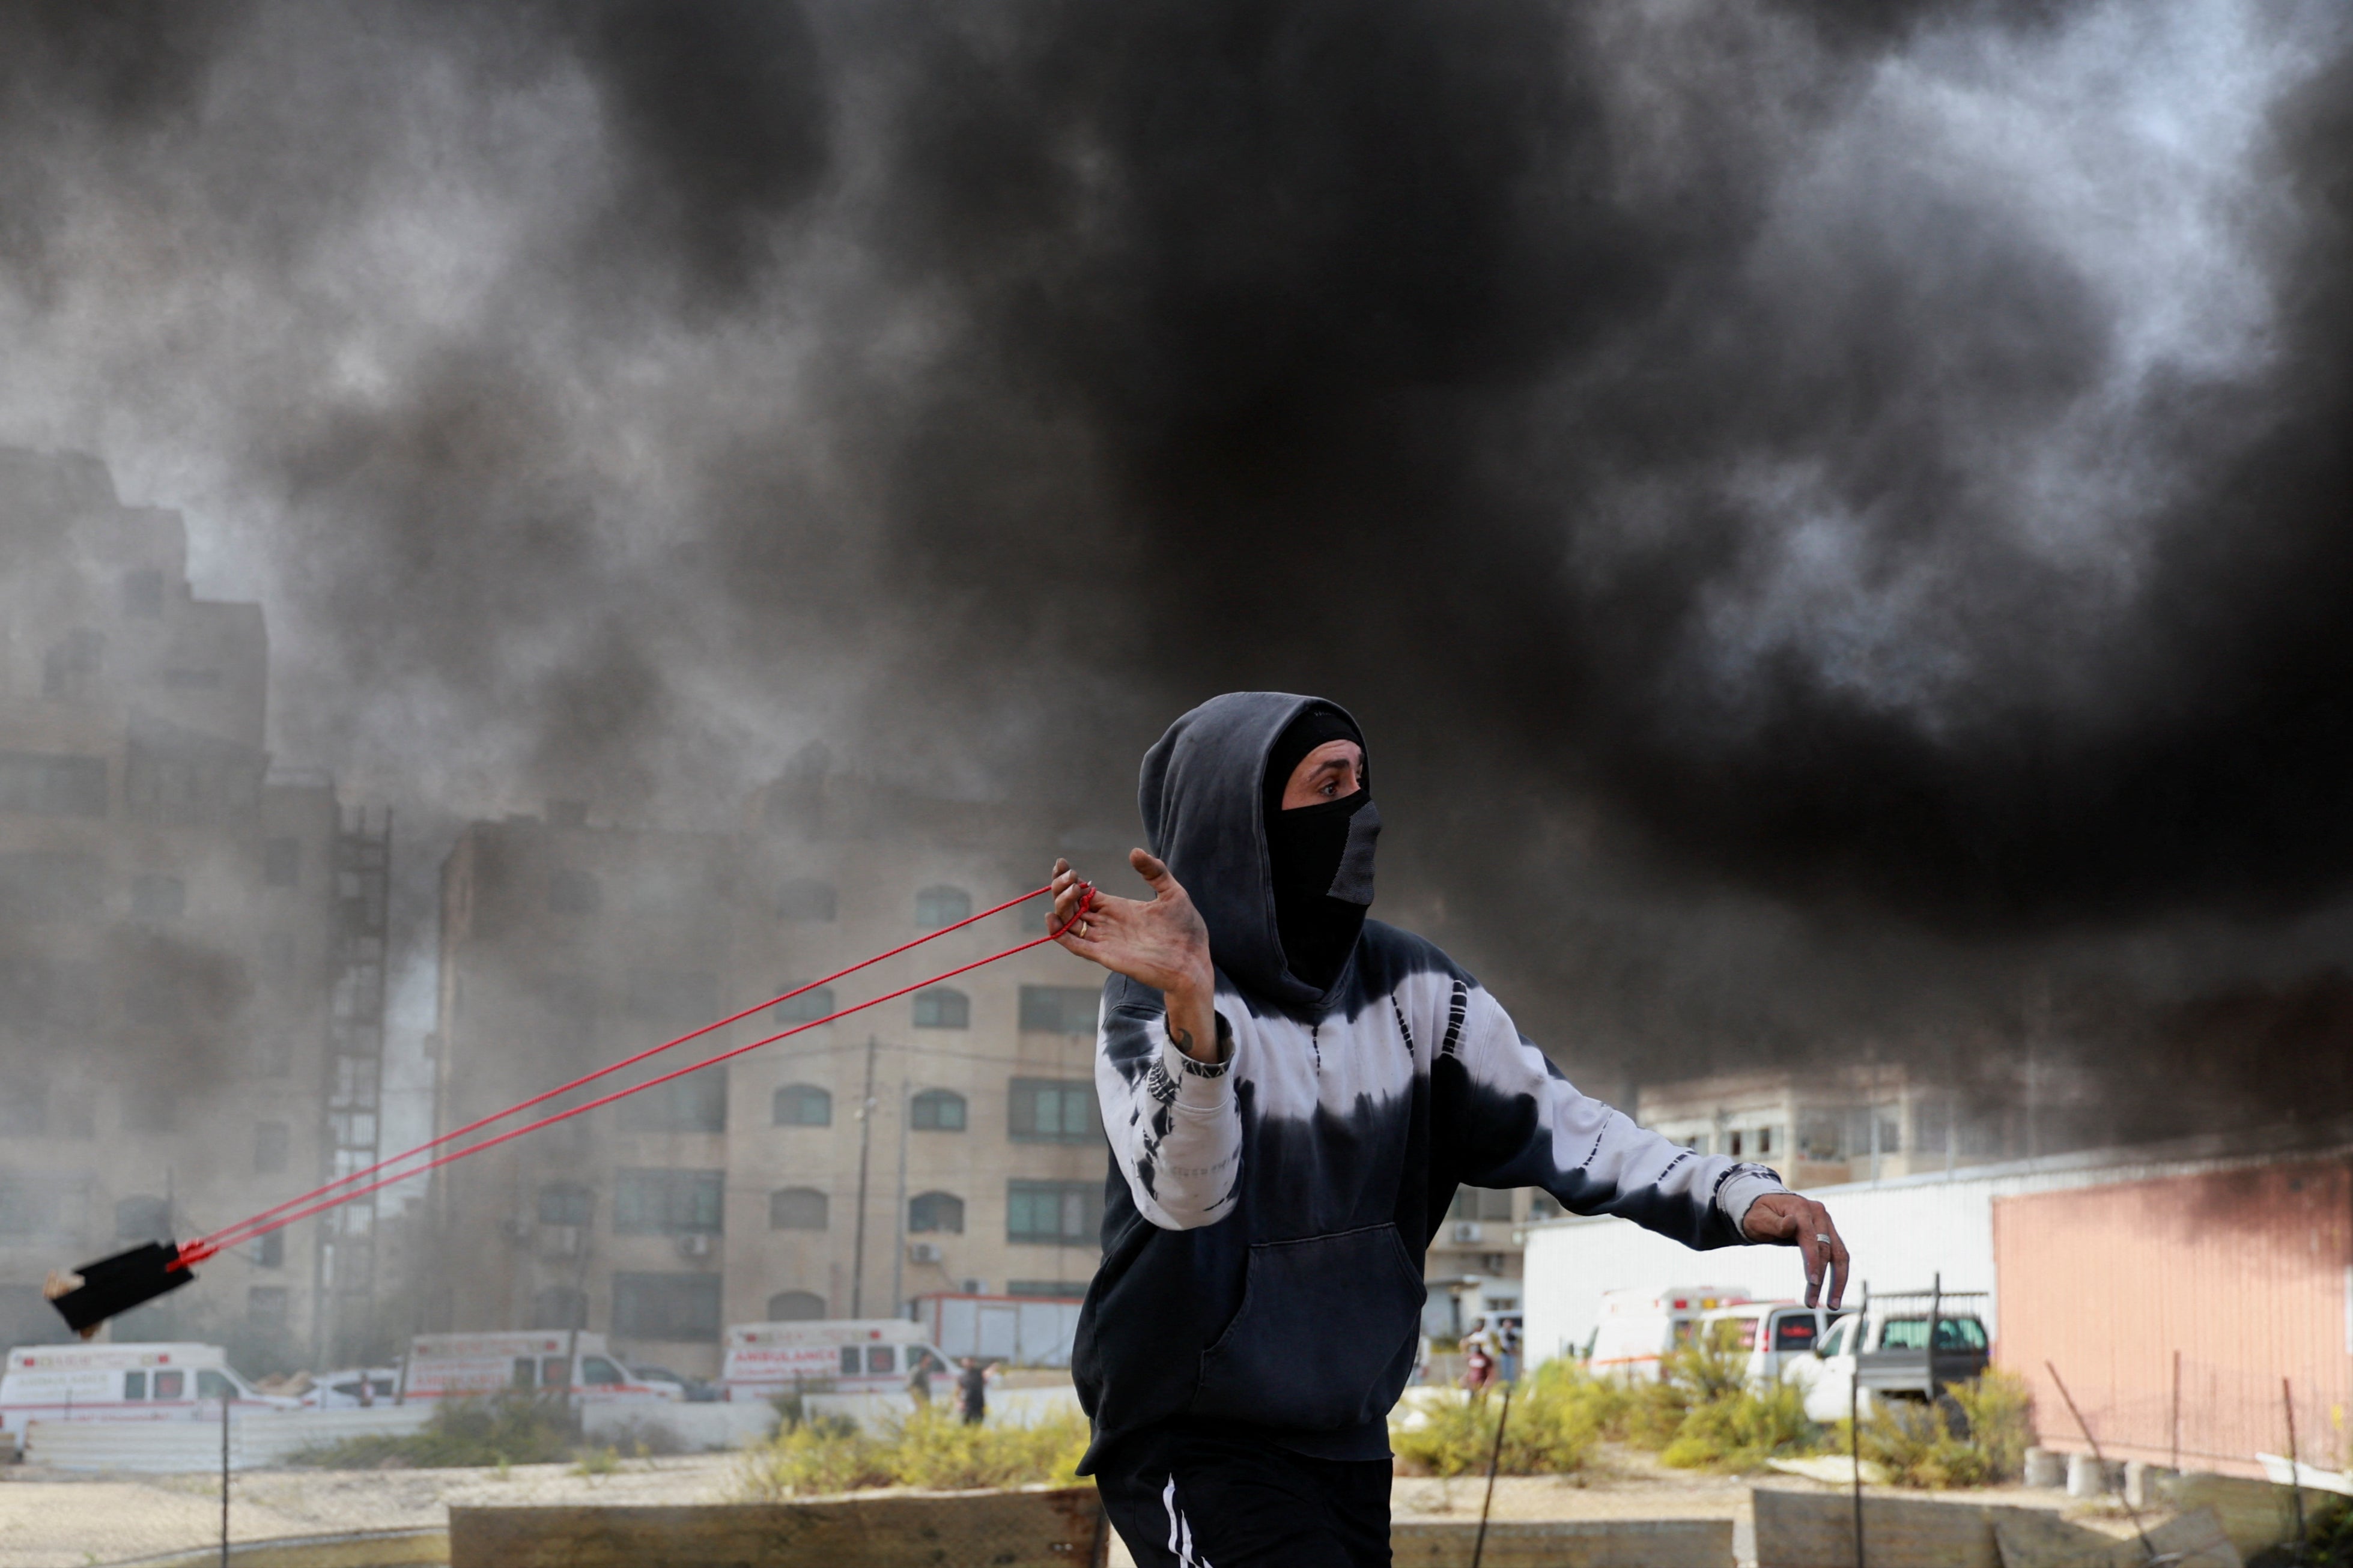 A Palestinian uses a sling to hurl stones during clashes with Israeli forces near Ramallah